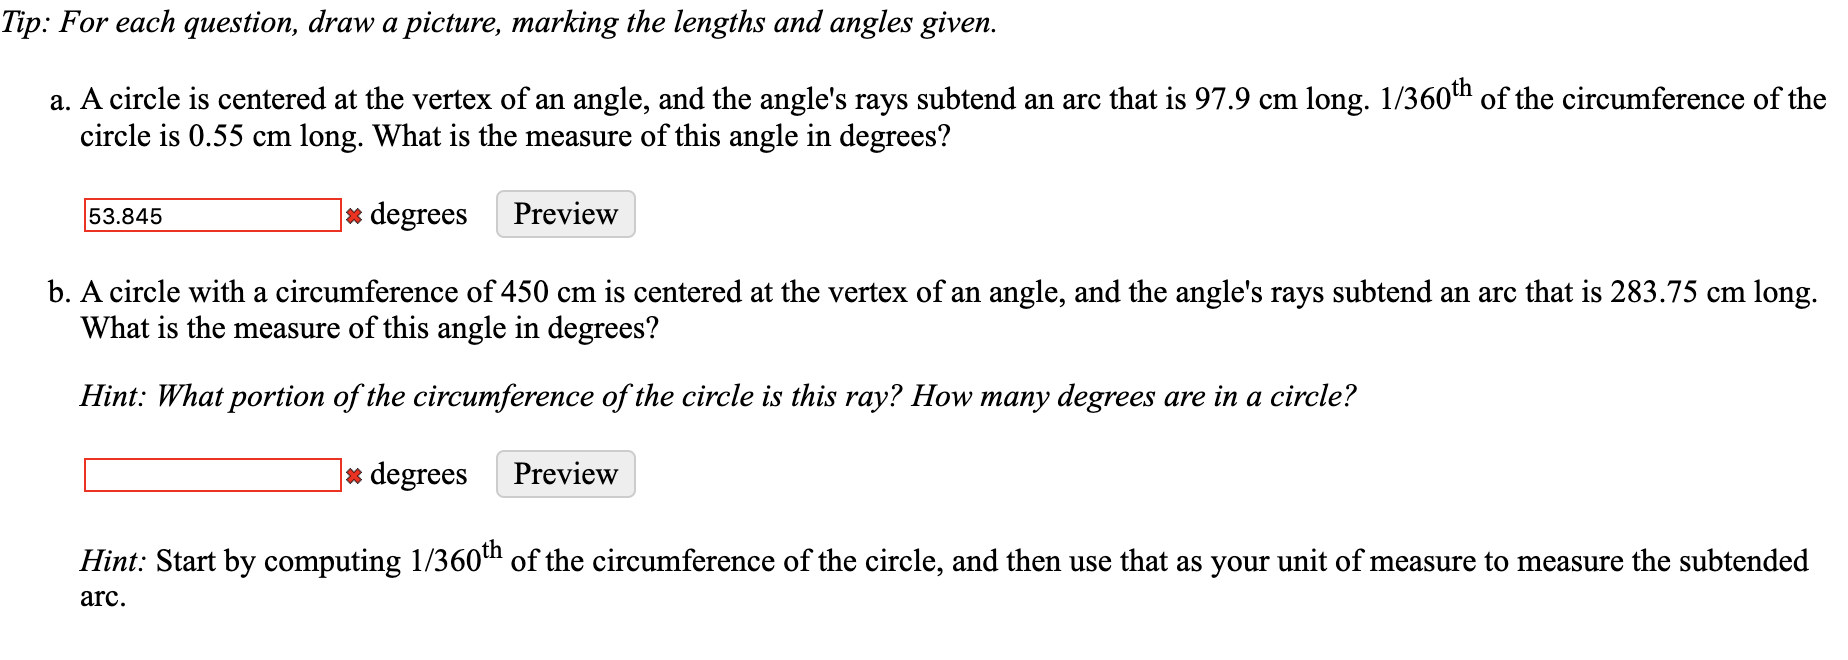 Tip: For each question, draw a picture, marking the lengths and angles given.
a. A circle is centered at the vertex of an angle, and the angle's rays subtend an arc that is 97.9 cm long. 1/360h of the circumference of the
circle is 0.55 cm long. What is the measure of this angle in degrees?
|* degrees
Preview
53.845
b. A circle with a circumference of 450 cm is centered at the vertex of an angle, and the angle's rays subtend an arc that is 283.75 cm long.
What is the measure of this angle in degrees?
Hint: What portion of the circumference of the circle is this ray? How many degrees are in a circle?
|* degrees
Preview
Hint: Start by computing 1/360th of the circumference of the circle, and then use that as your unit of measure to measure the subtended
arc.
